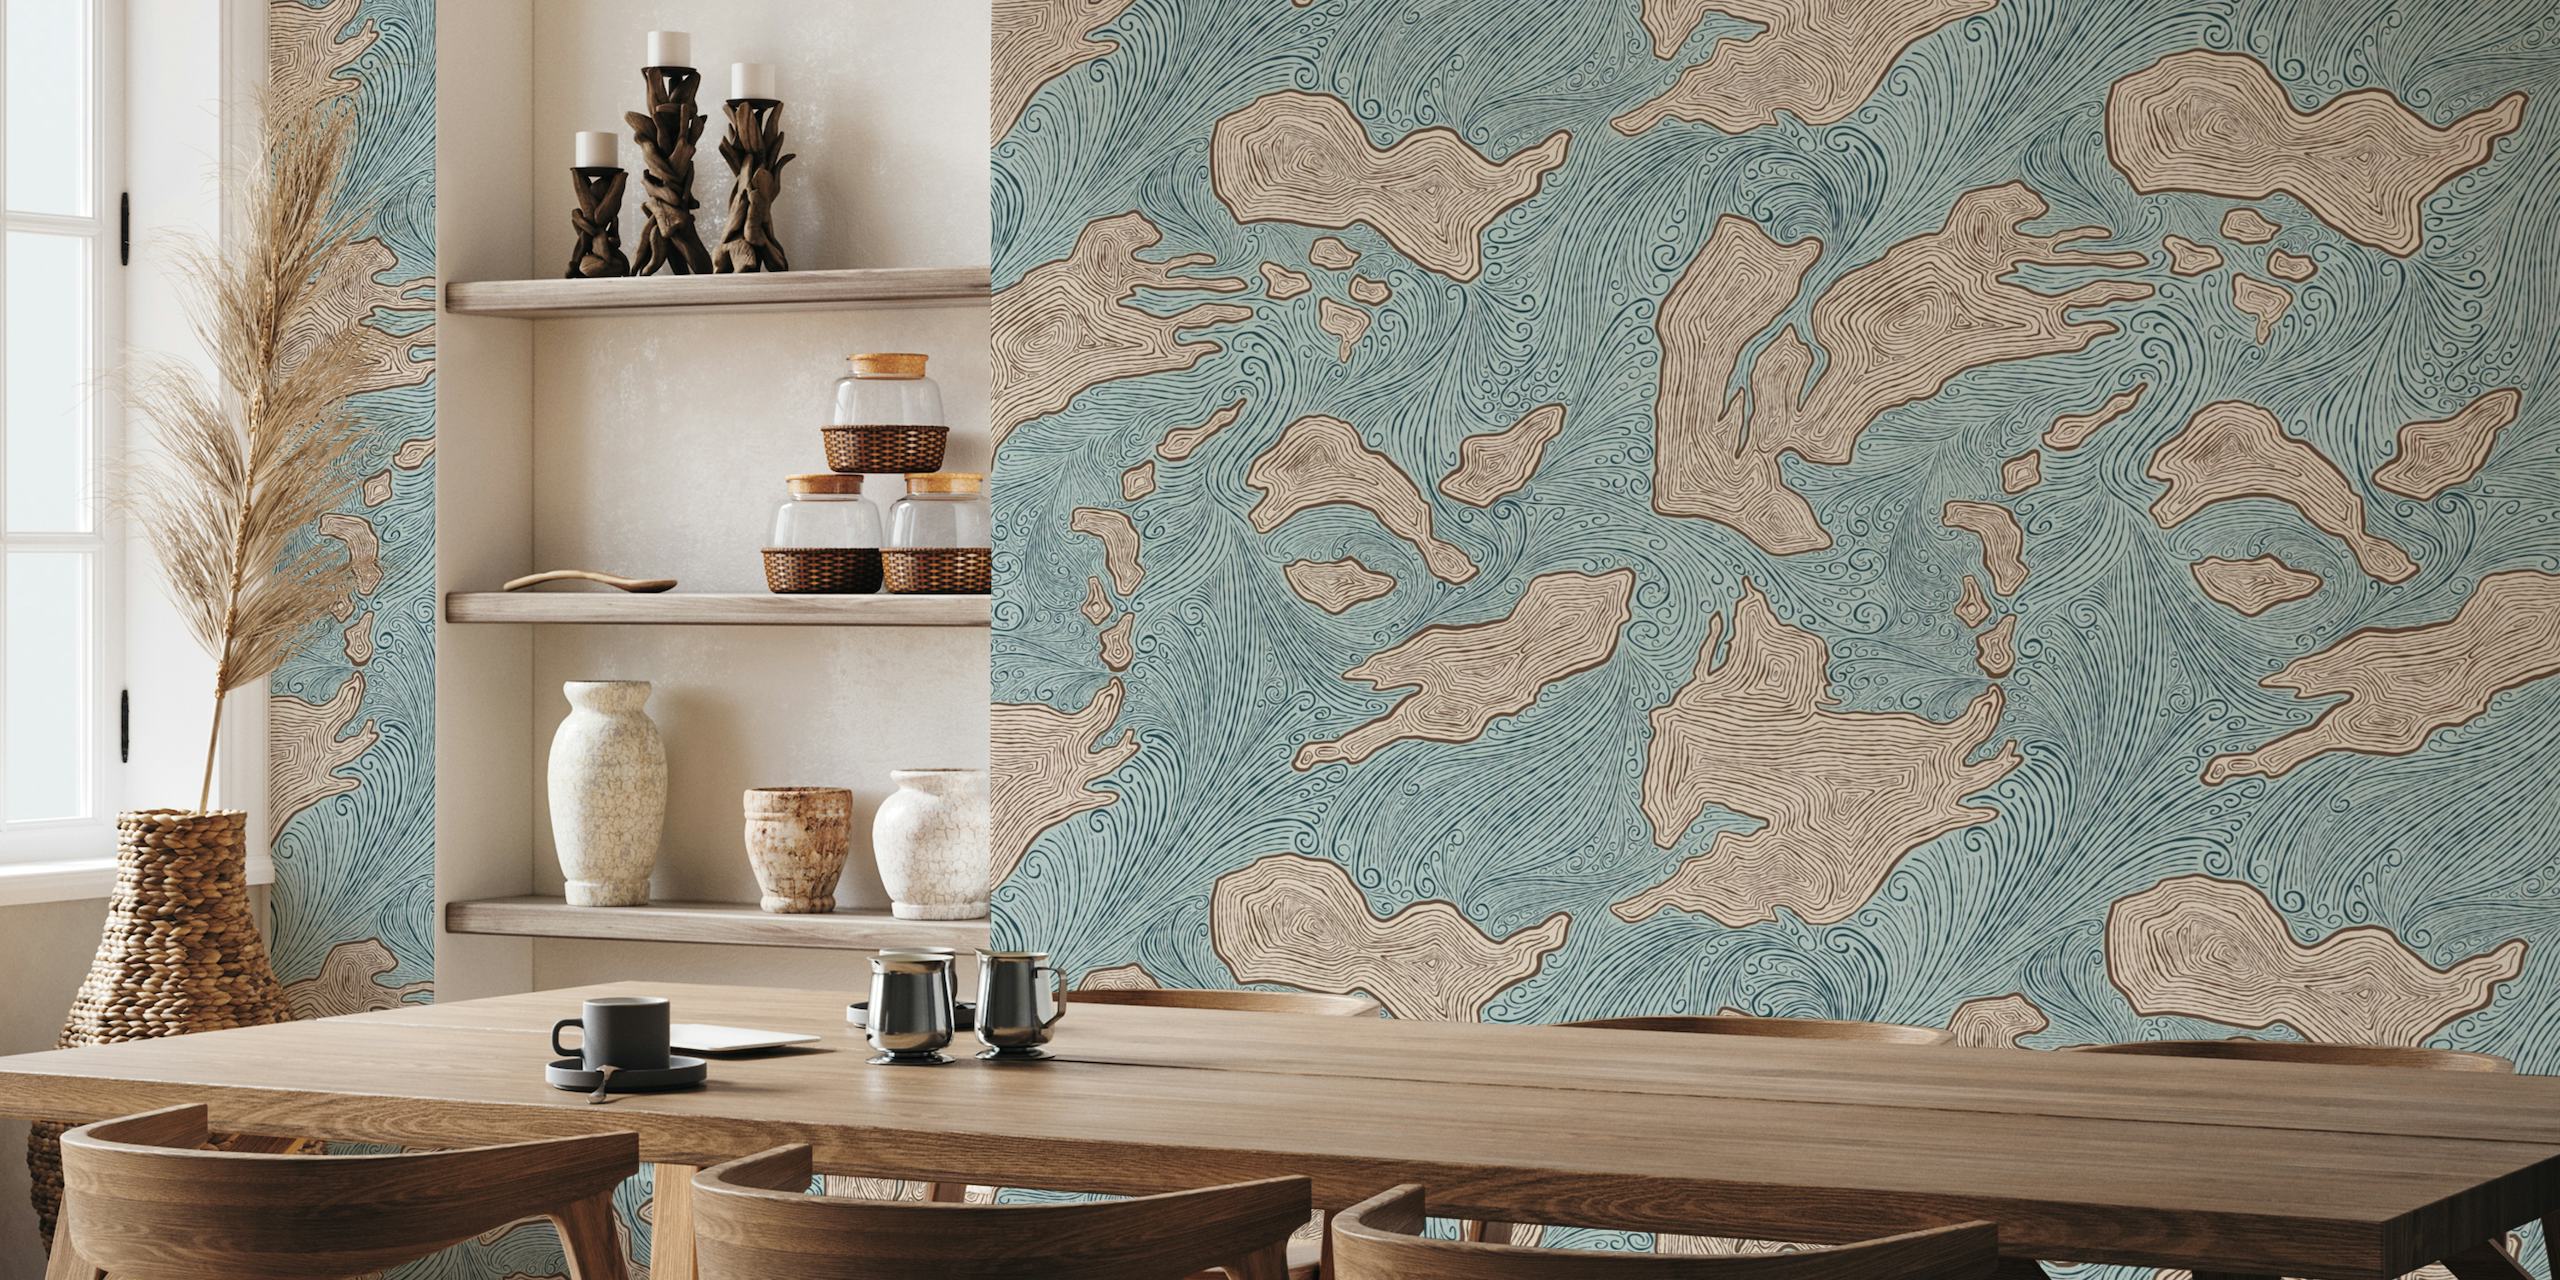 Abstract island shapes wall mural in soothing blues and earth tones named 'Undiscovered Islands'.